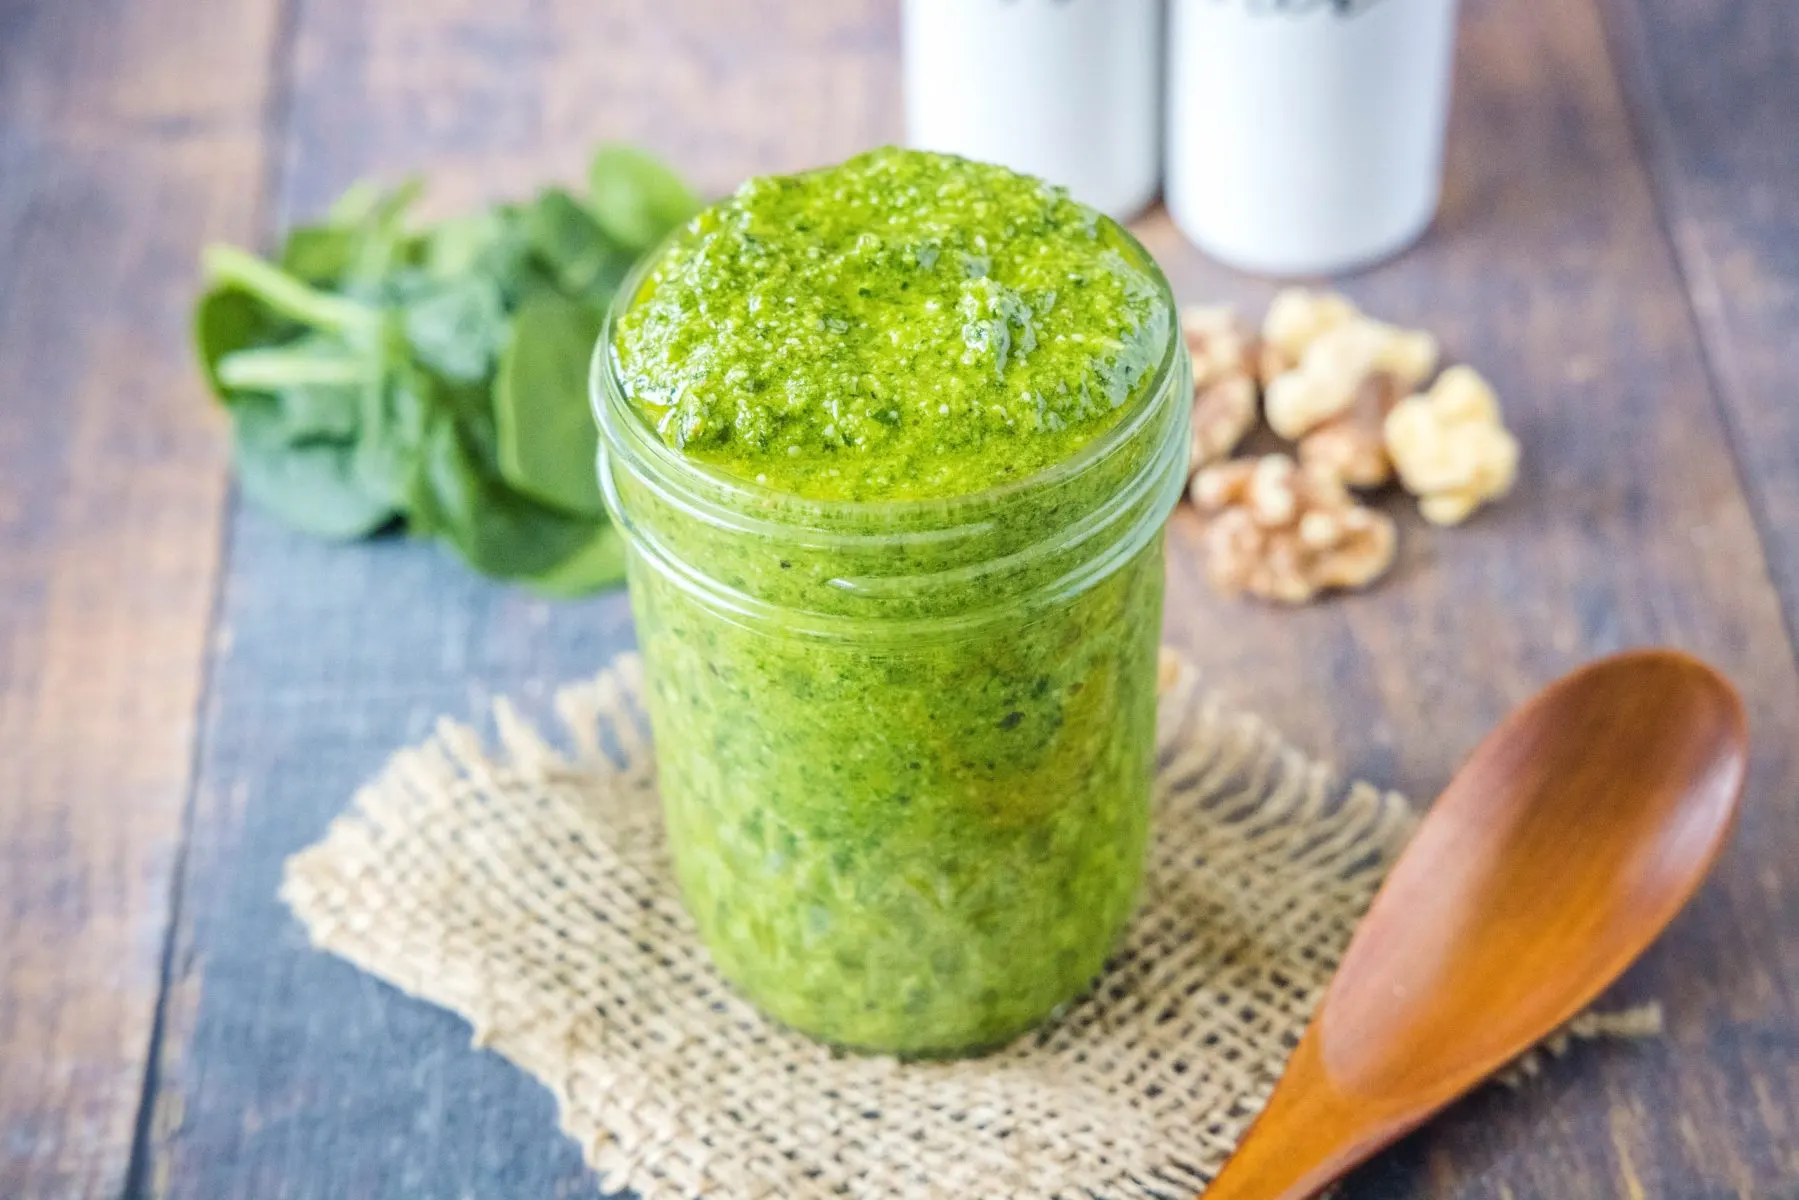 A jar of pesto with walnuts and spinach in the background